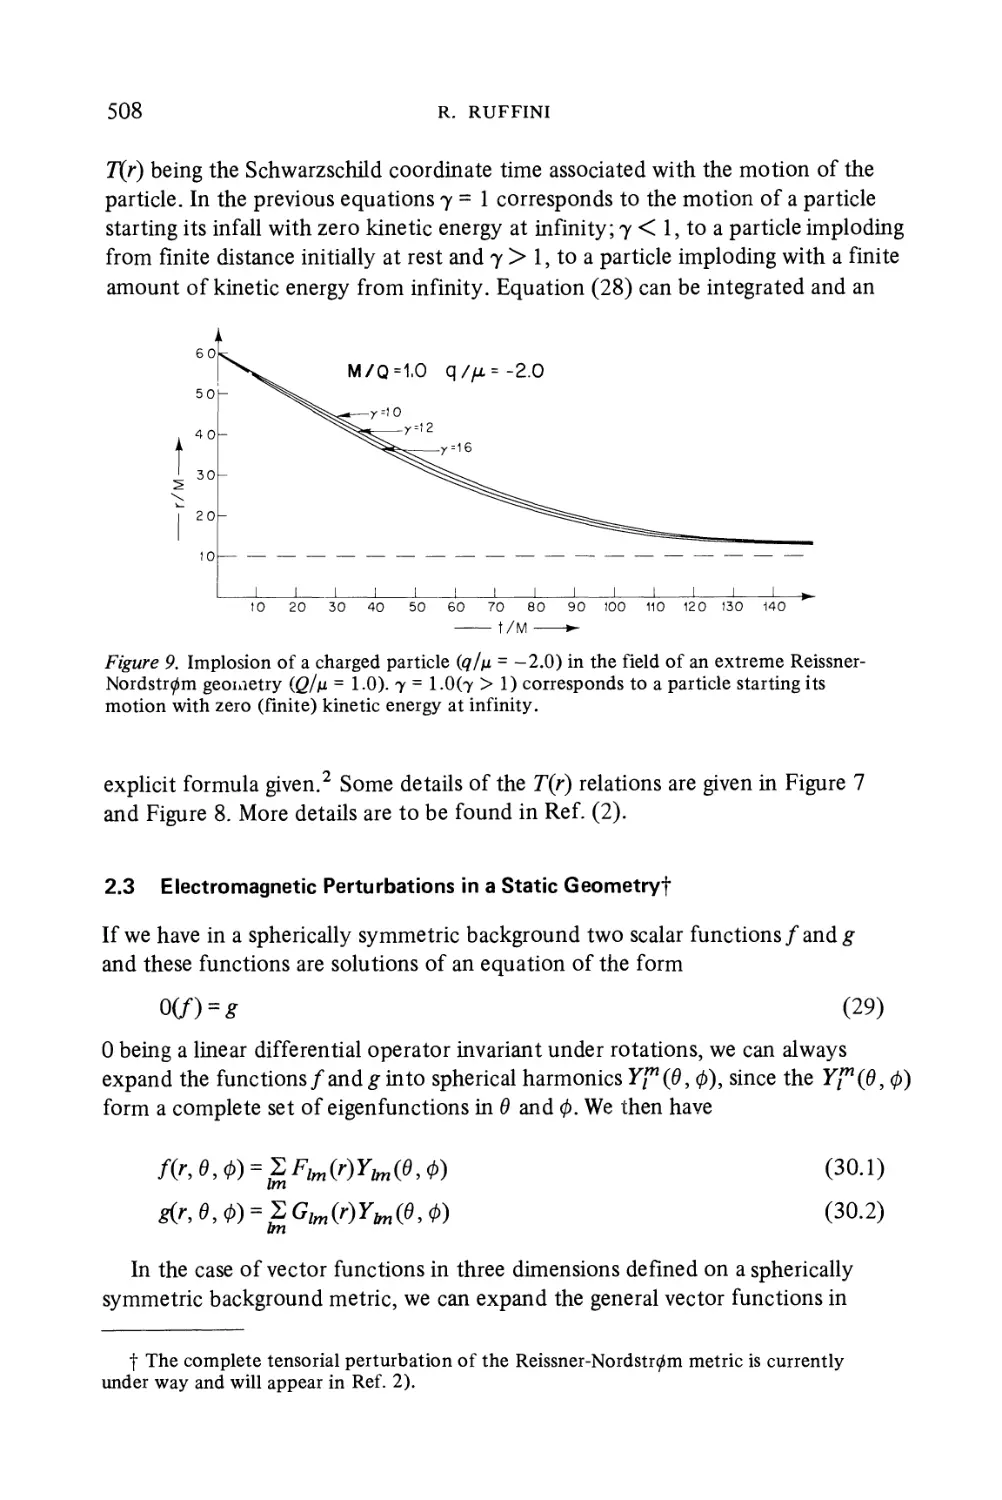 2.3 Electromagnetic Perturbations in a Static Geometry